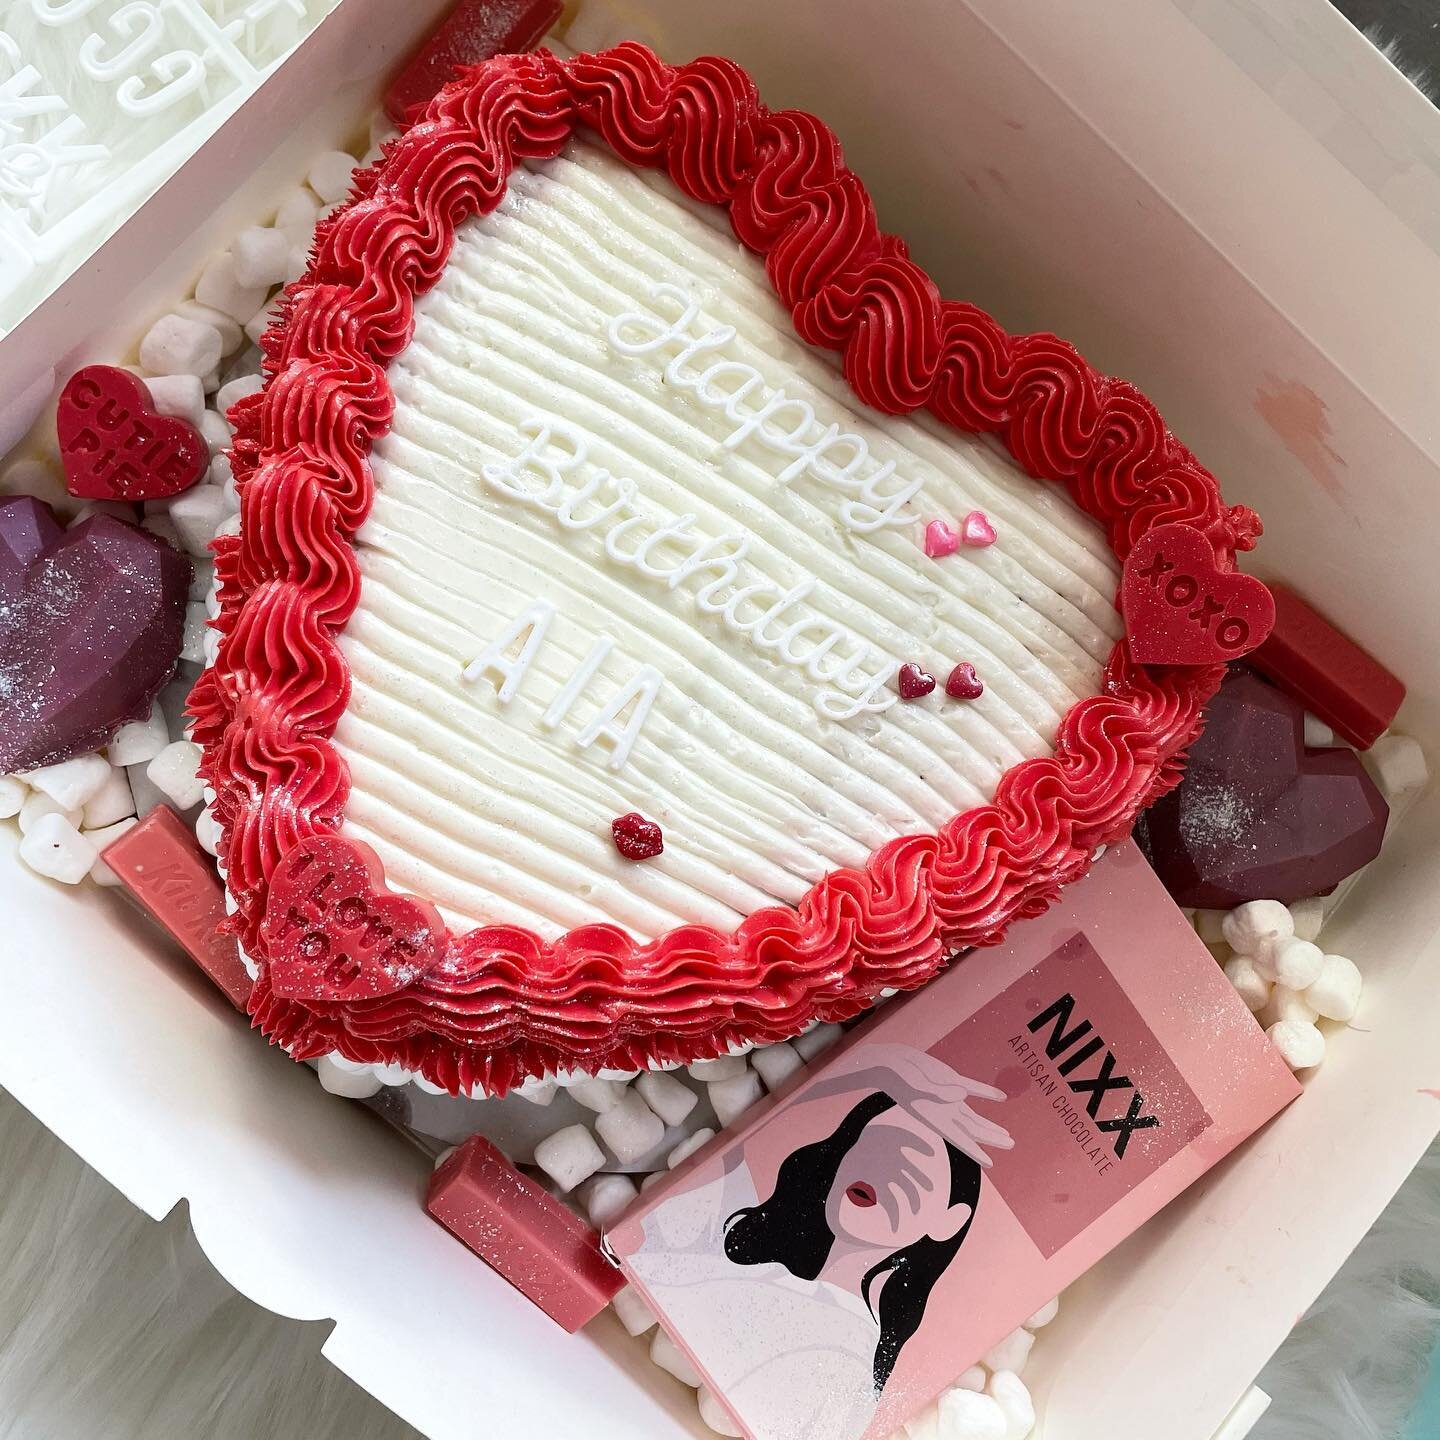 Happy Valentine&rsquo;s Day to all and Happy Birthday to my sister @ai.arts_ ! 

All products used are from @cakeartbox 

#cakeheart #valentinescake #nixxchocolate #cakebox #chocolategooey